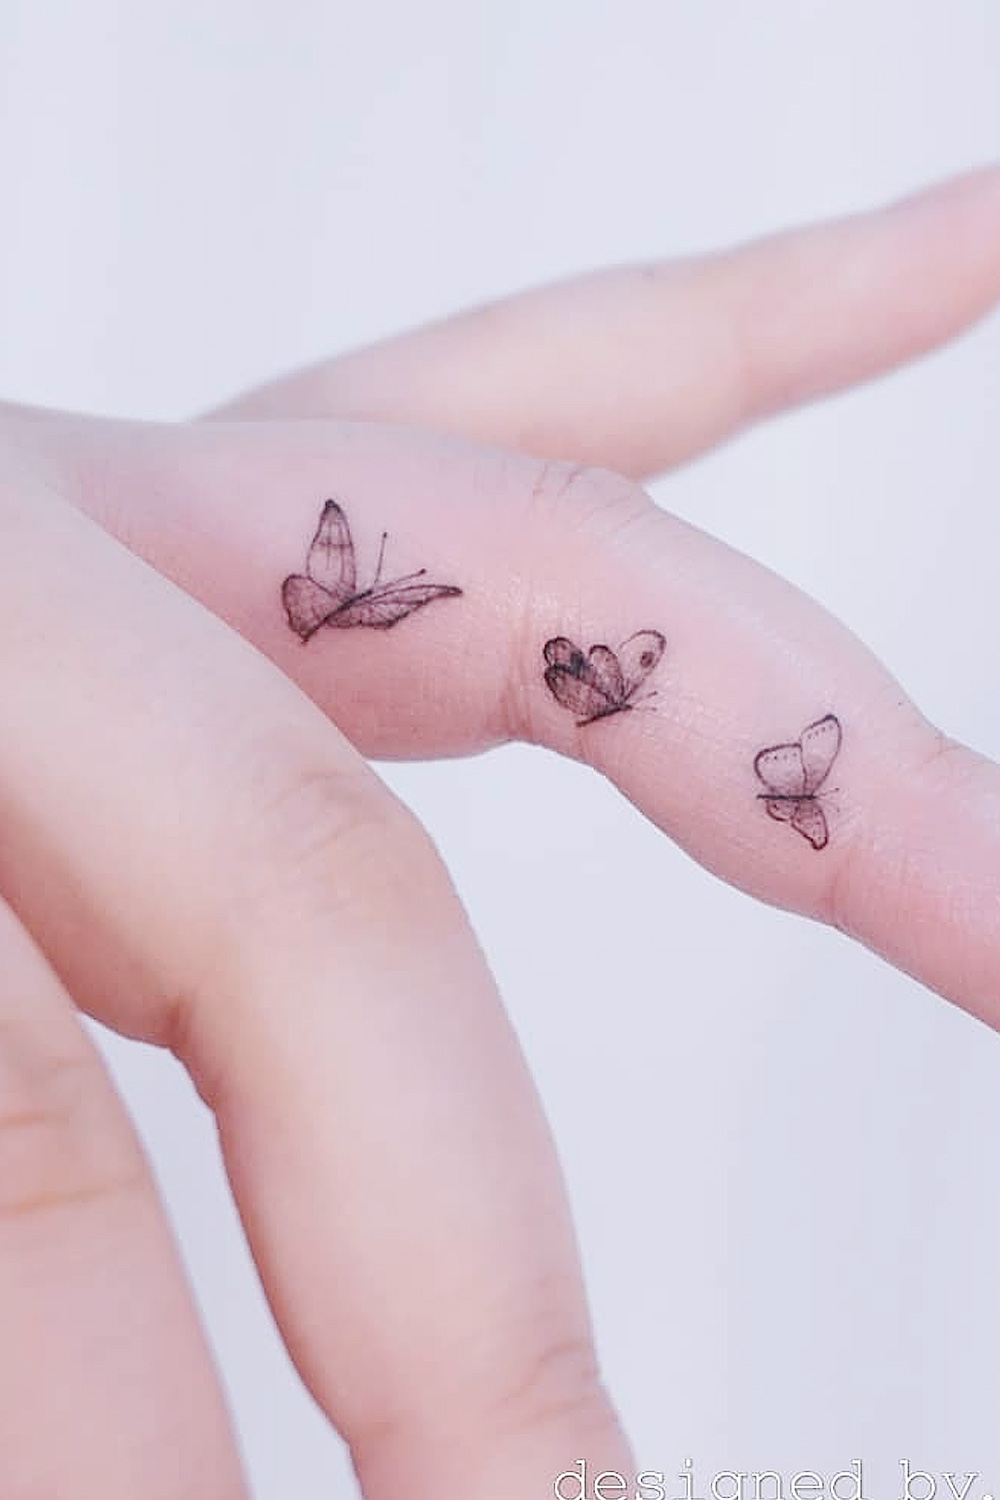 Tattoos are replacing engagement rings for good! - Times of India